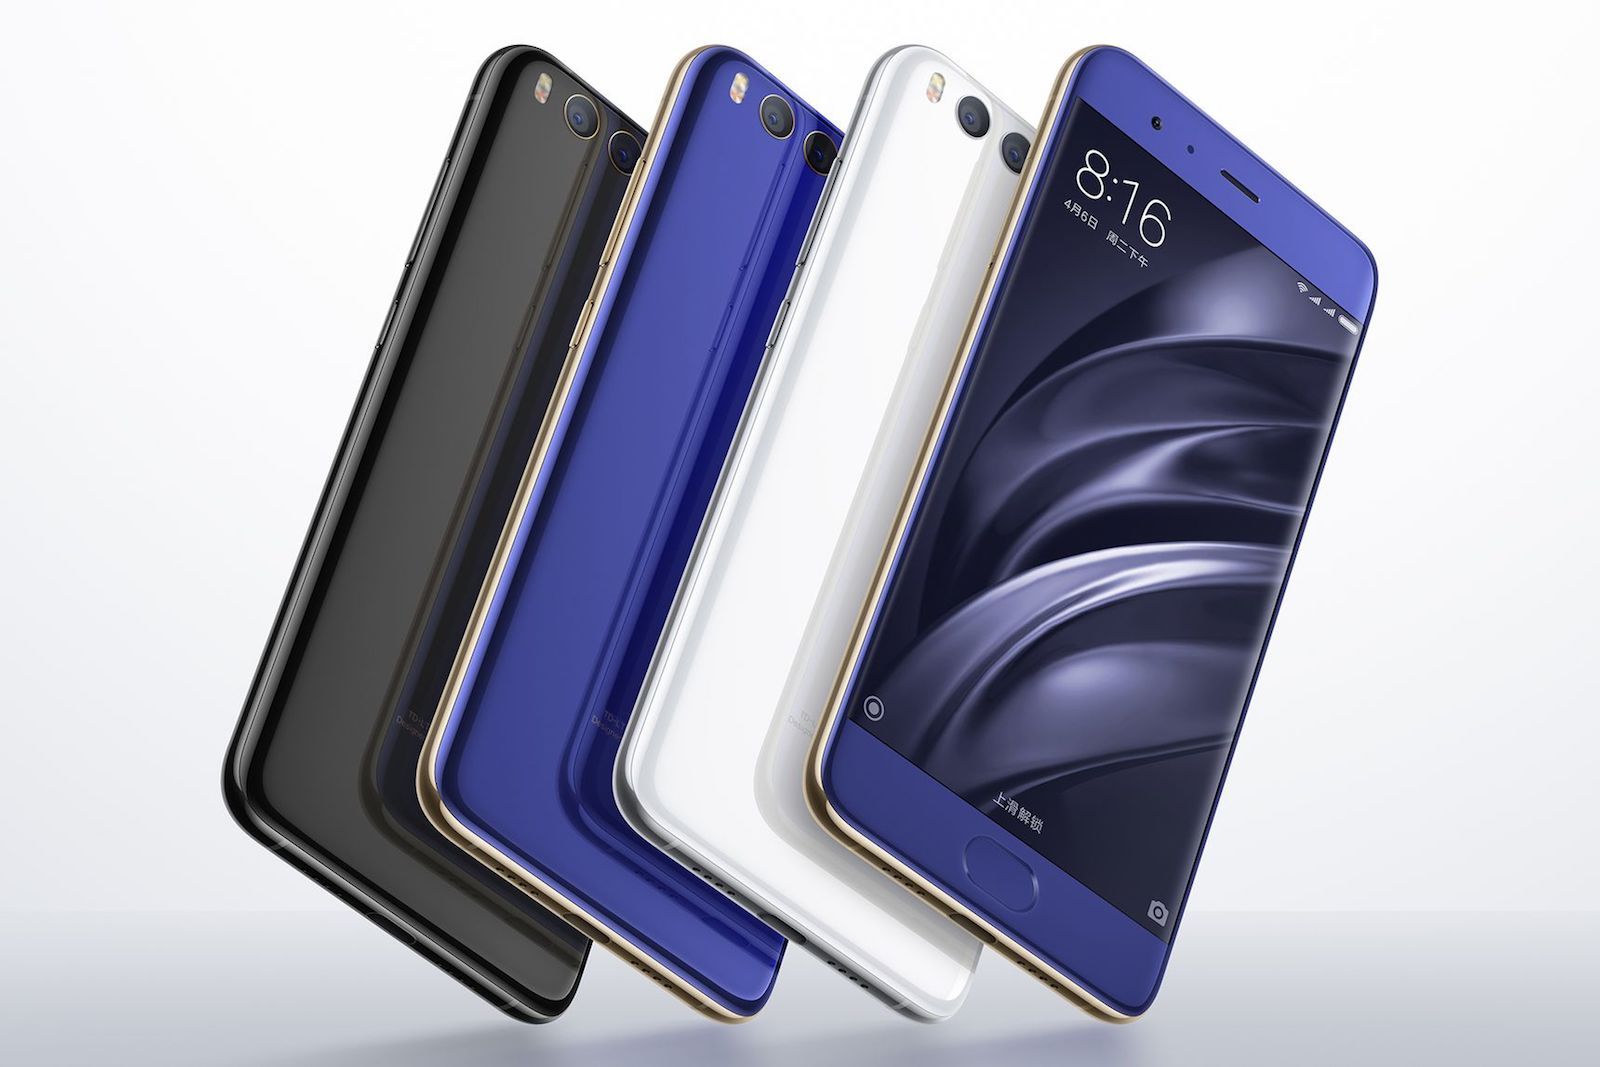 xiaomi mi 6 launches with dual rear camera system superior to the iphone 7 plus  image 1